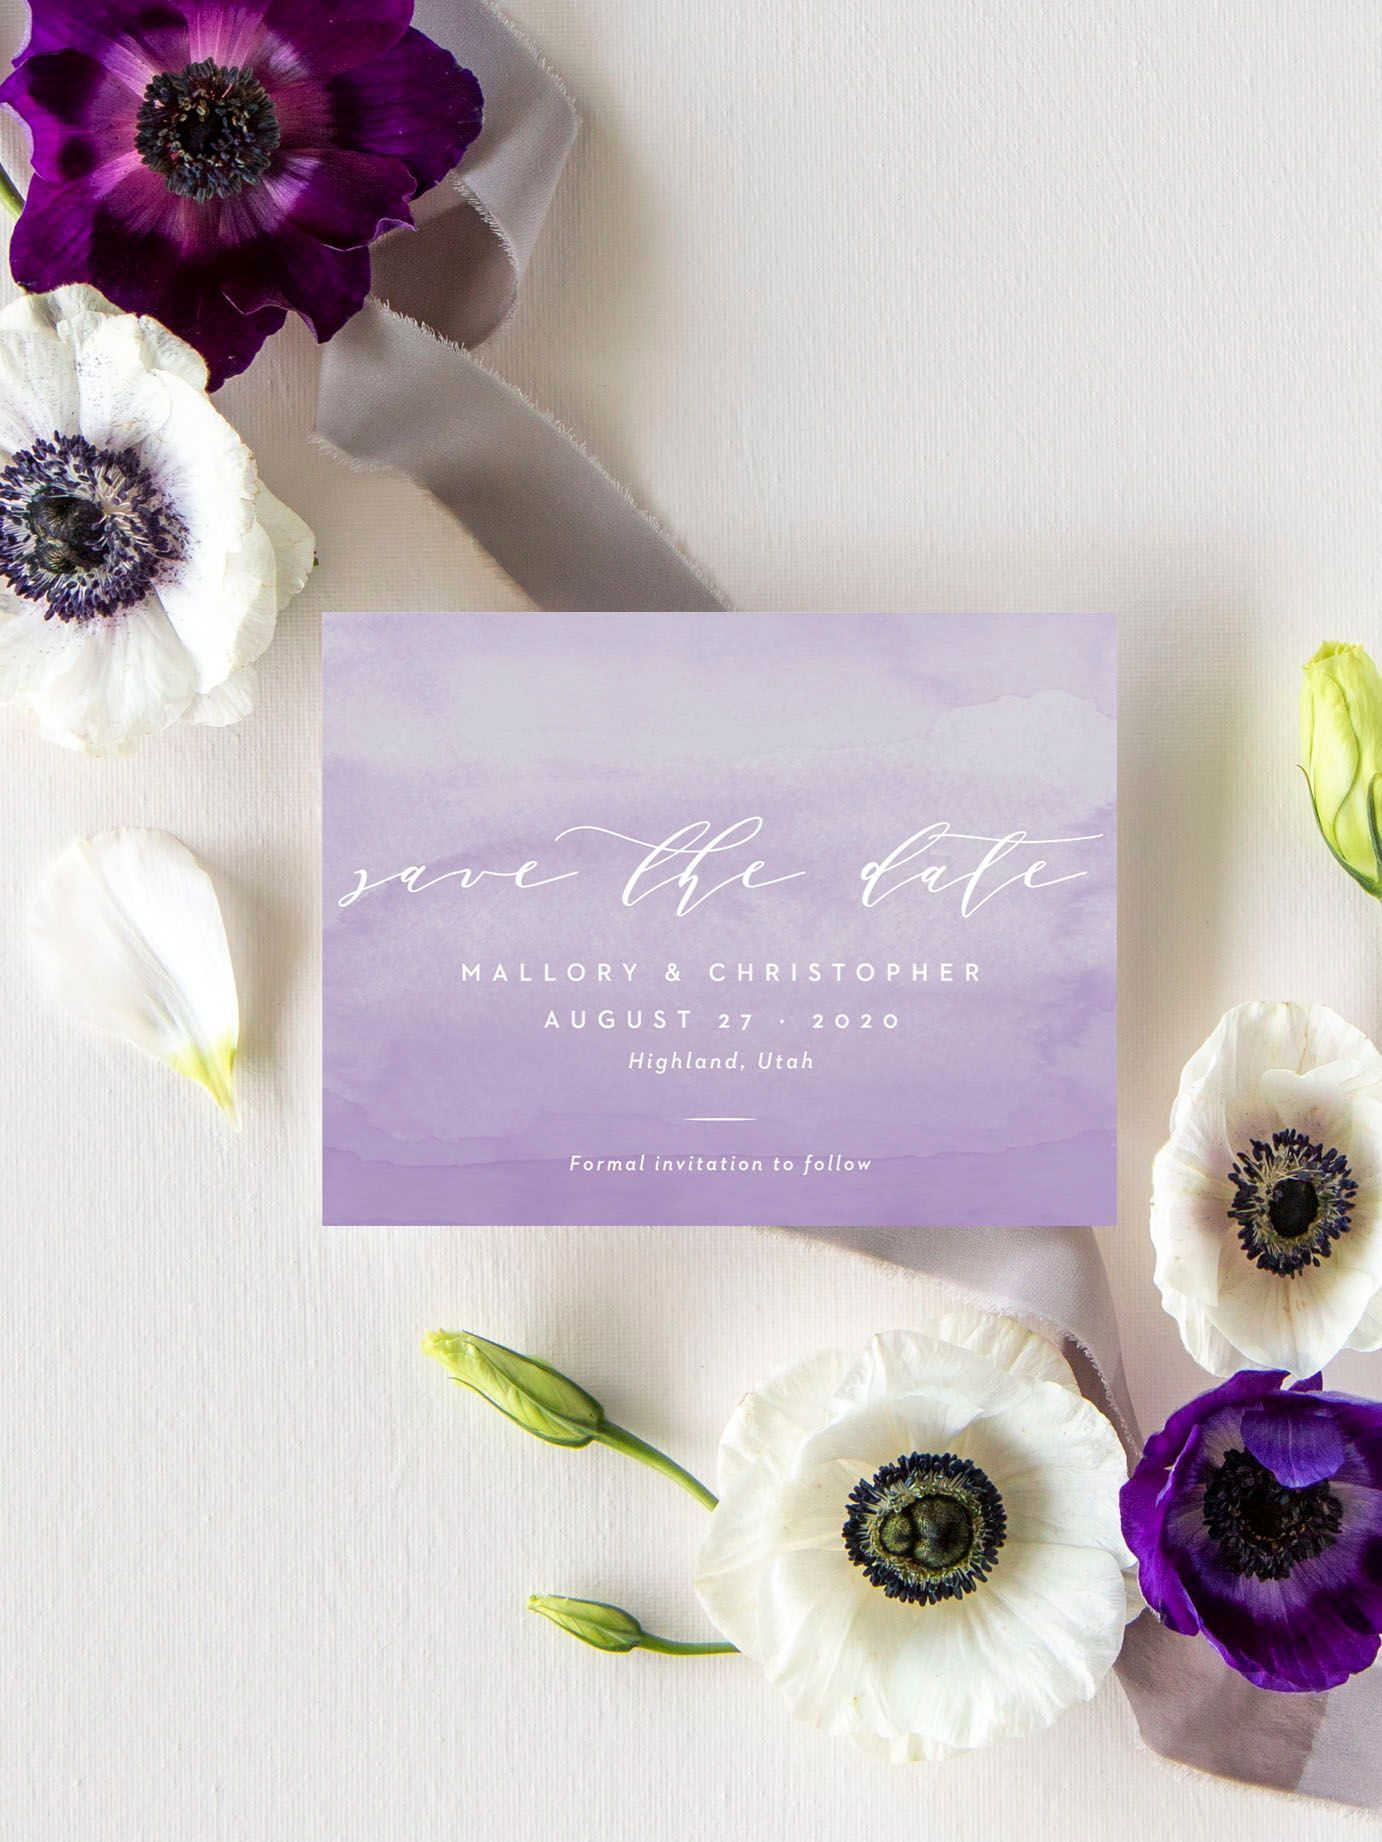 watercolored lilac wedding save the date with white script lettering surrounded by white and purple anemone flowers